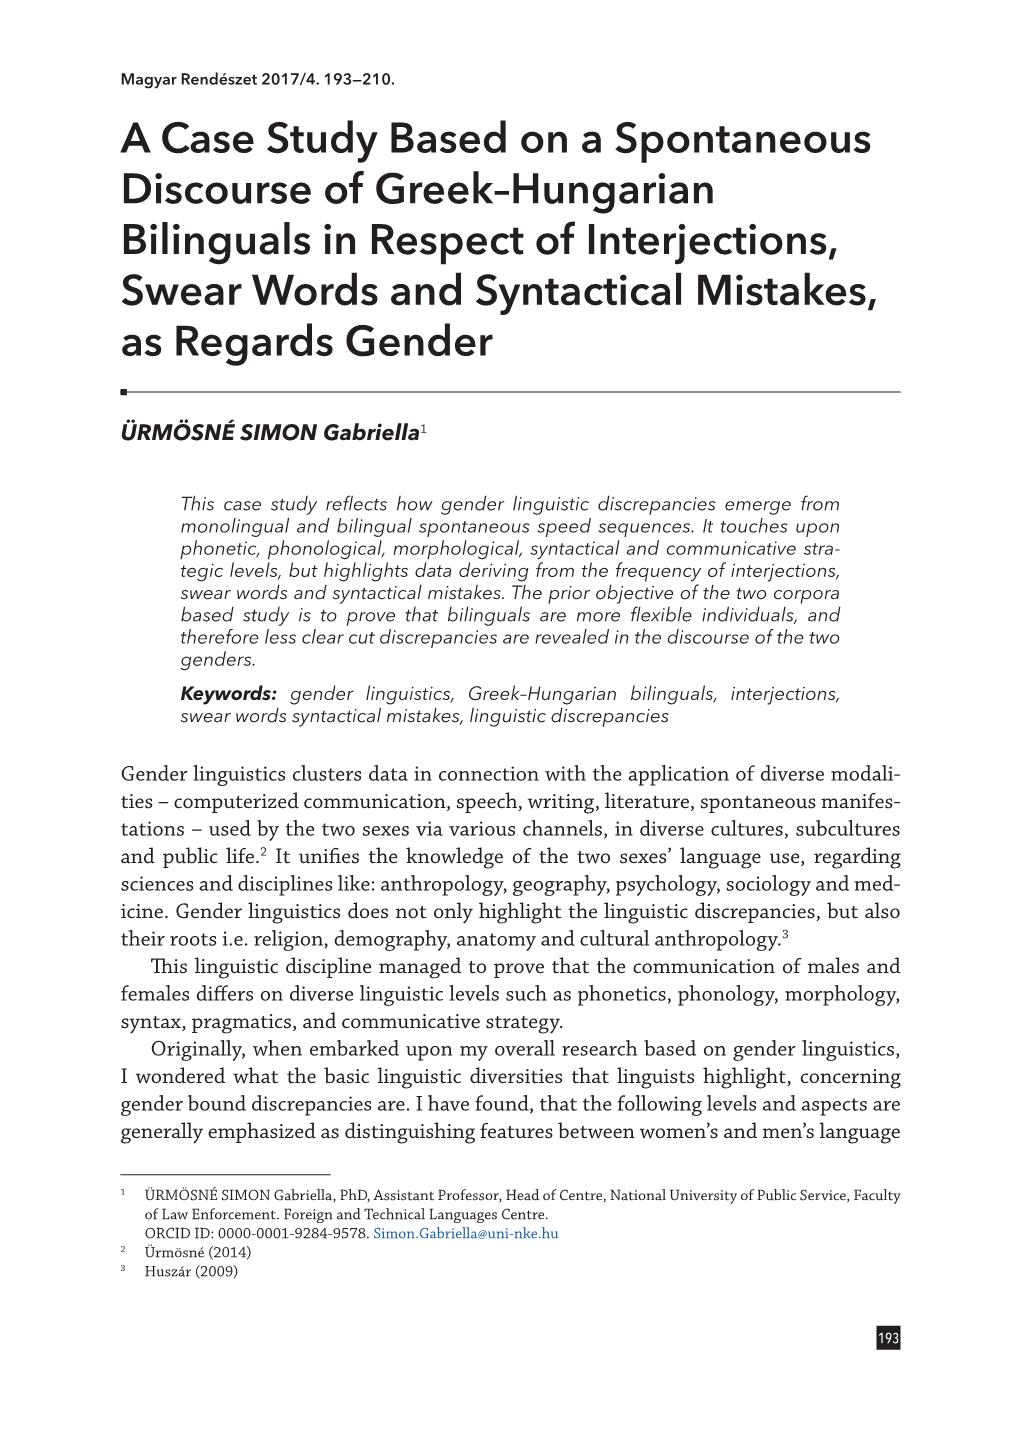 A Case Study Based on a Spontaneous Discourse of Greek–Hungarian Bilinguals in Respect of Interjections, Swear Words and Syntactical Mistakes, As Regards Gender